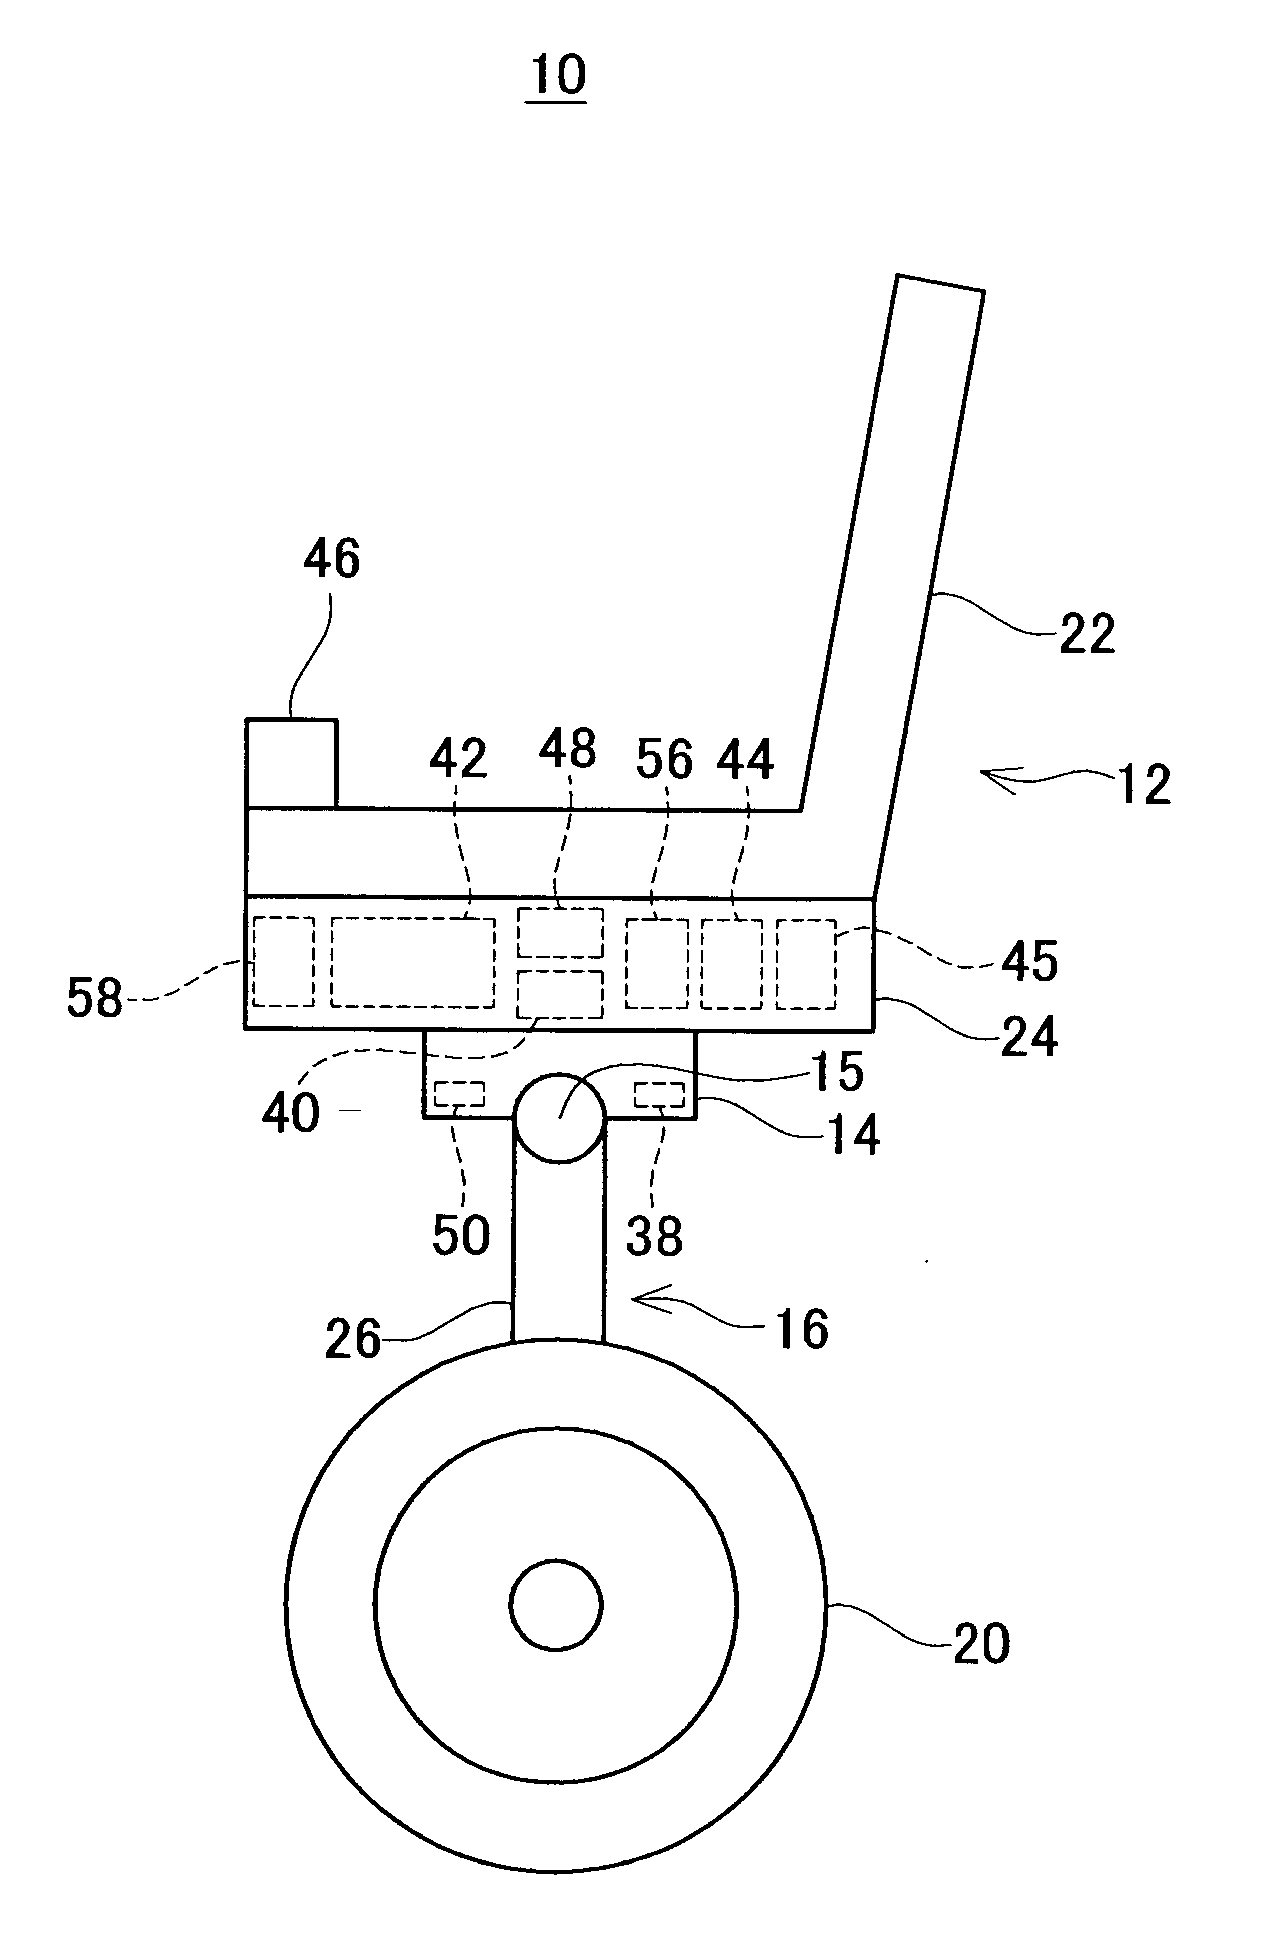 Coaxial two-wheeled inverted pendulum type moving vehicle